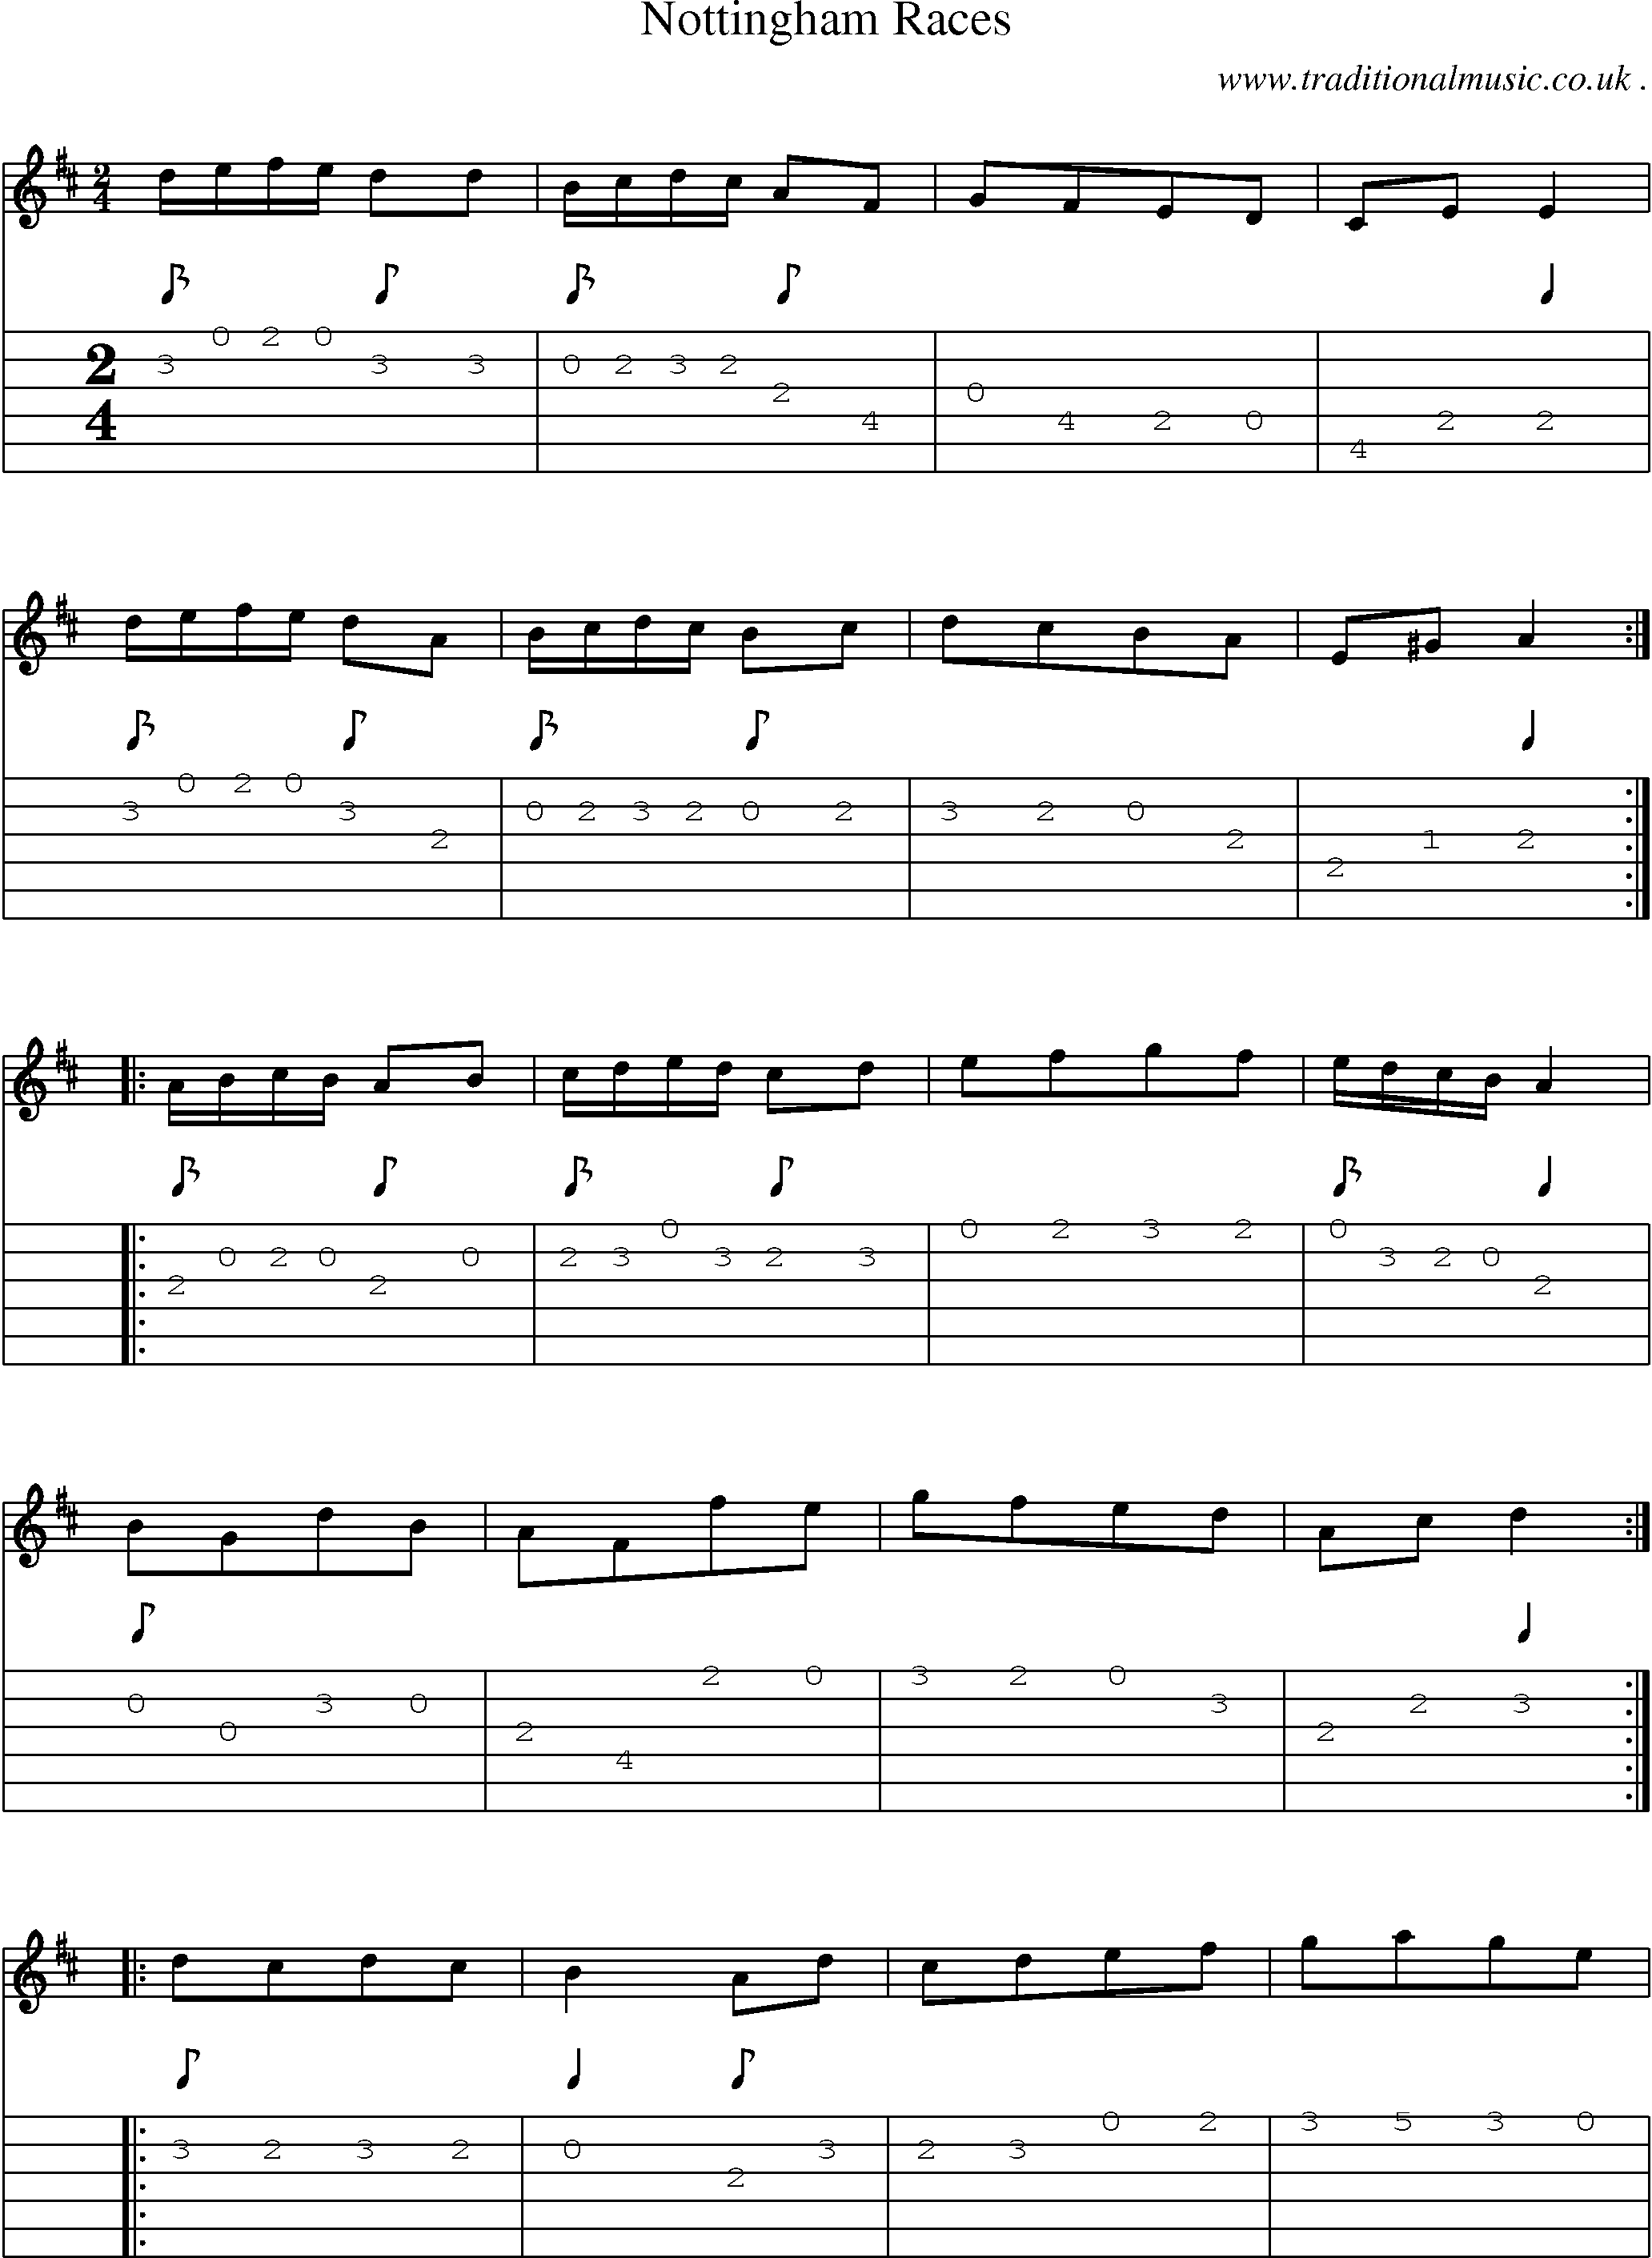 Sheet-Music and Guitar Tabs for Nottingham Races